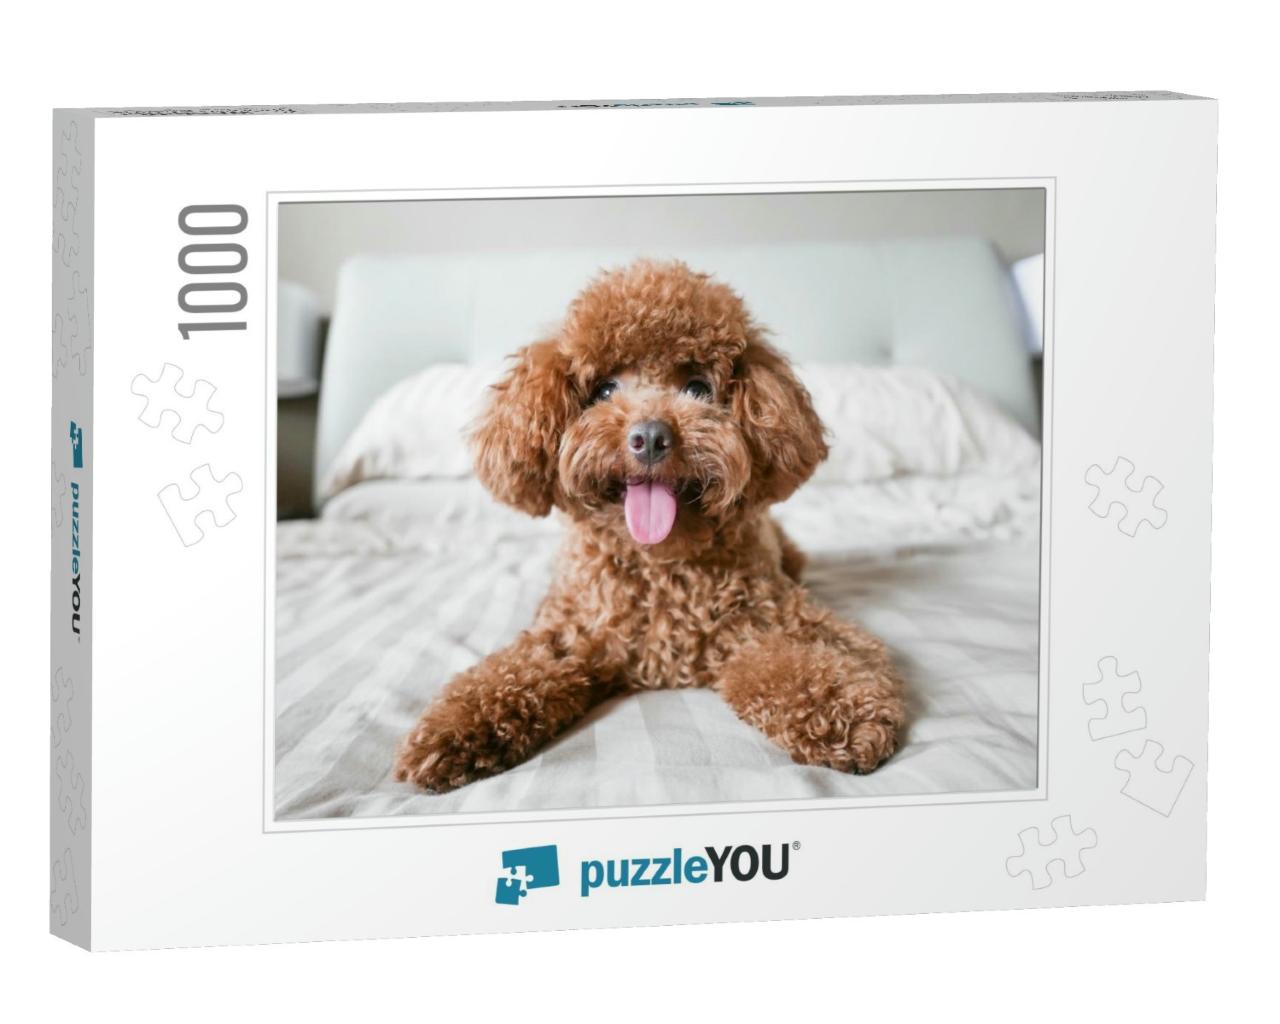 Cute Toy Poodle Resting on Bed... Jigsaw Puzzle with 1000 pieces